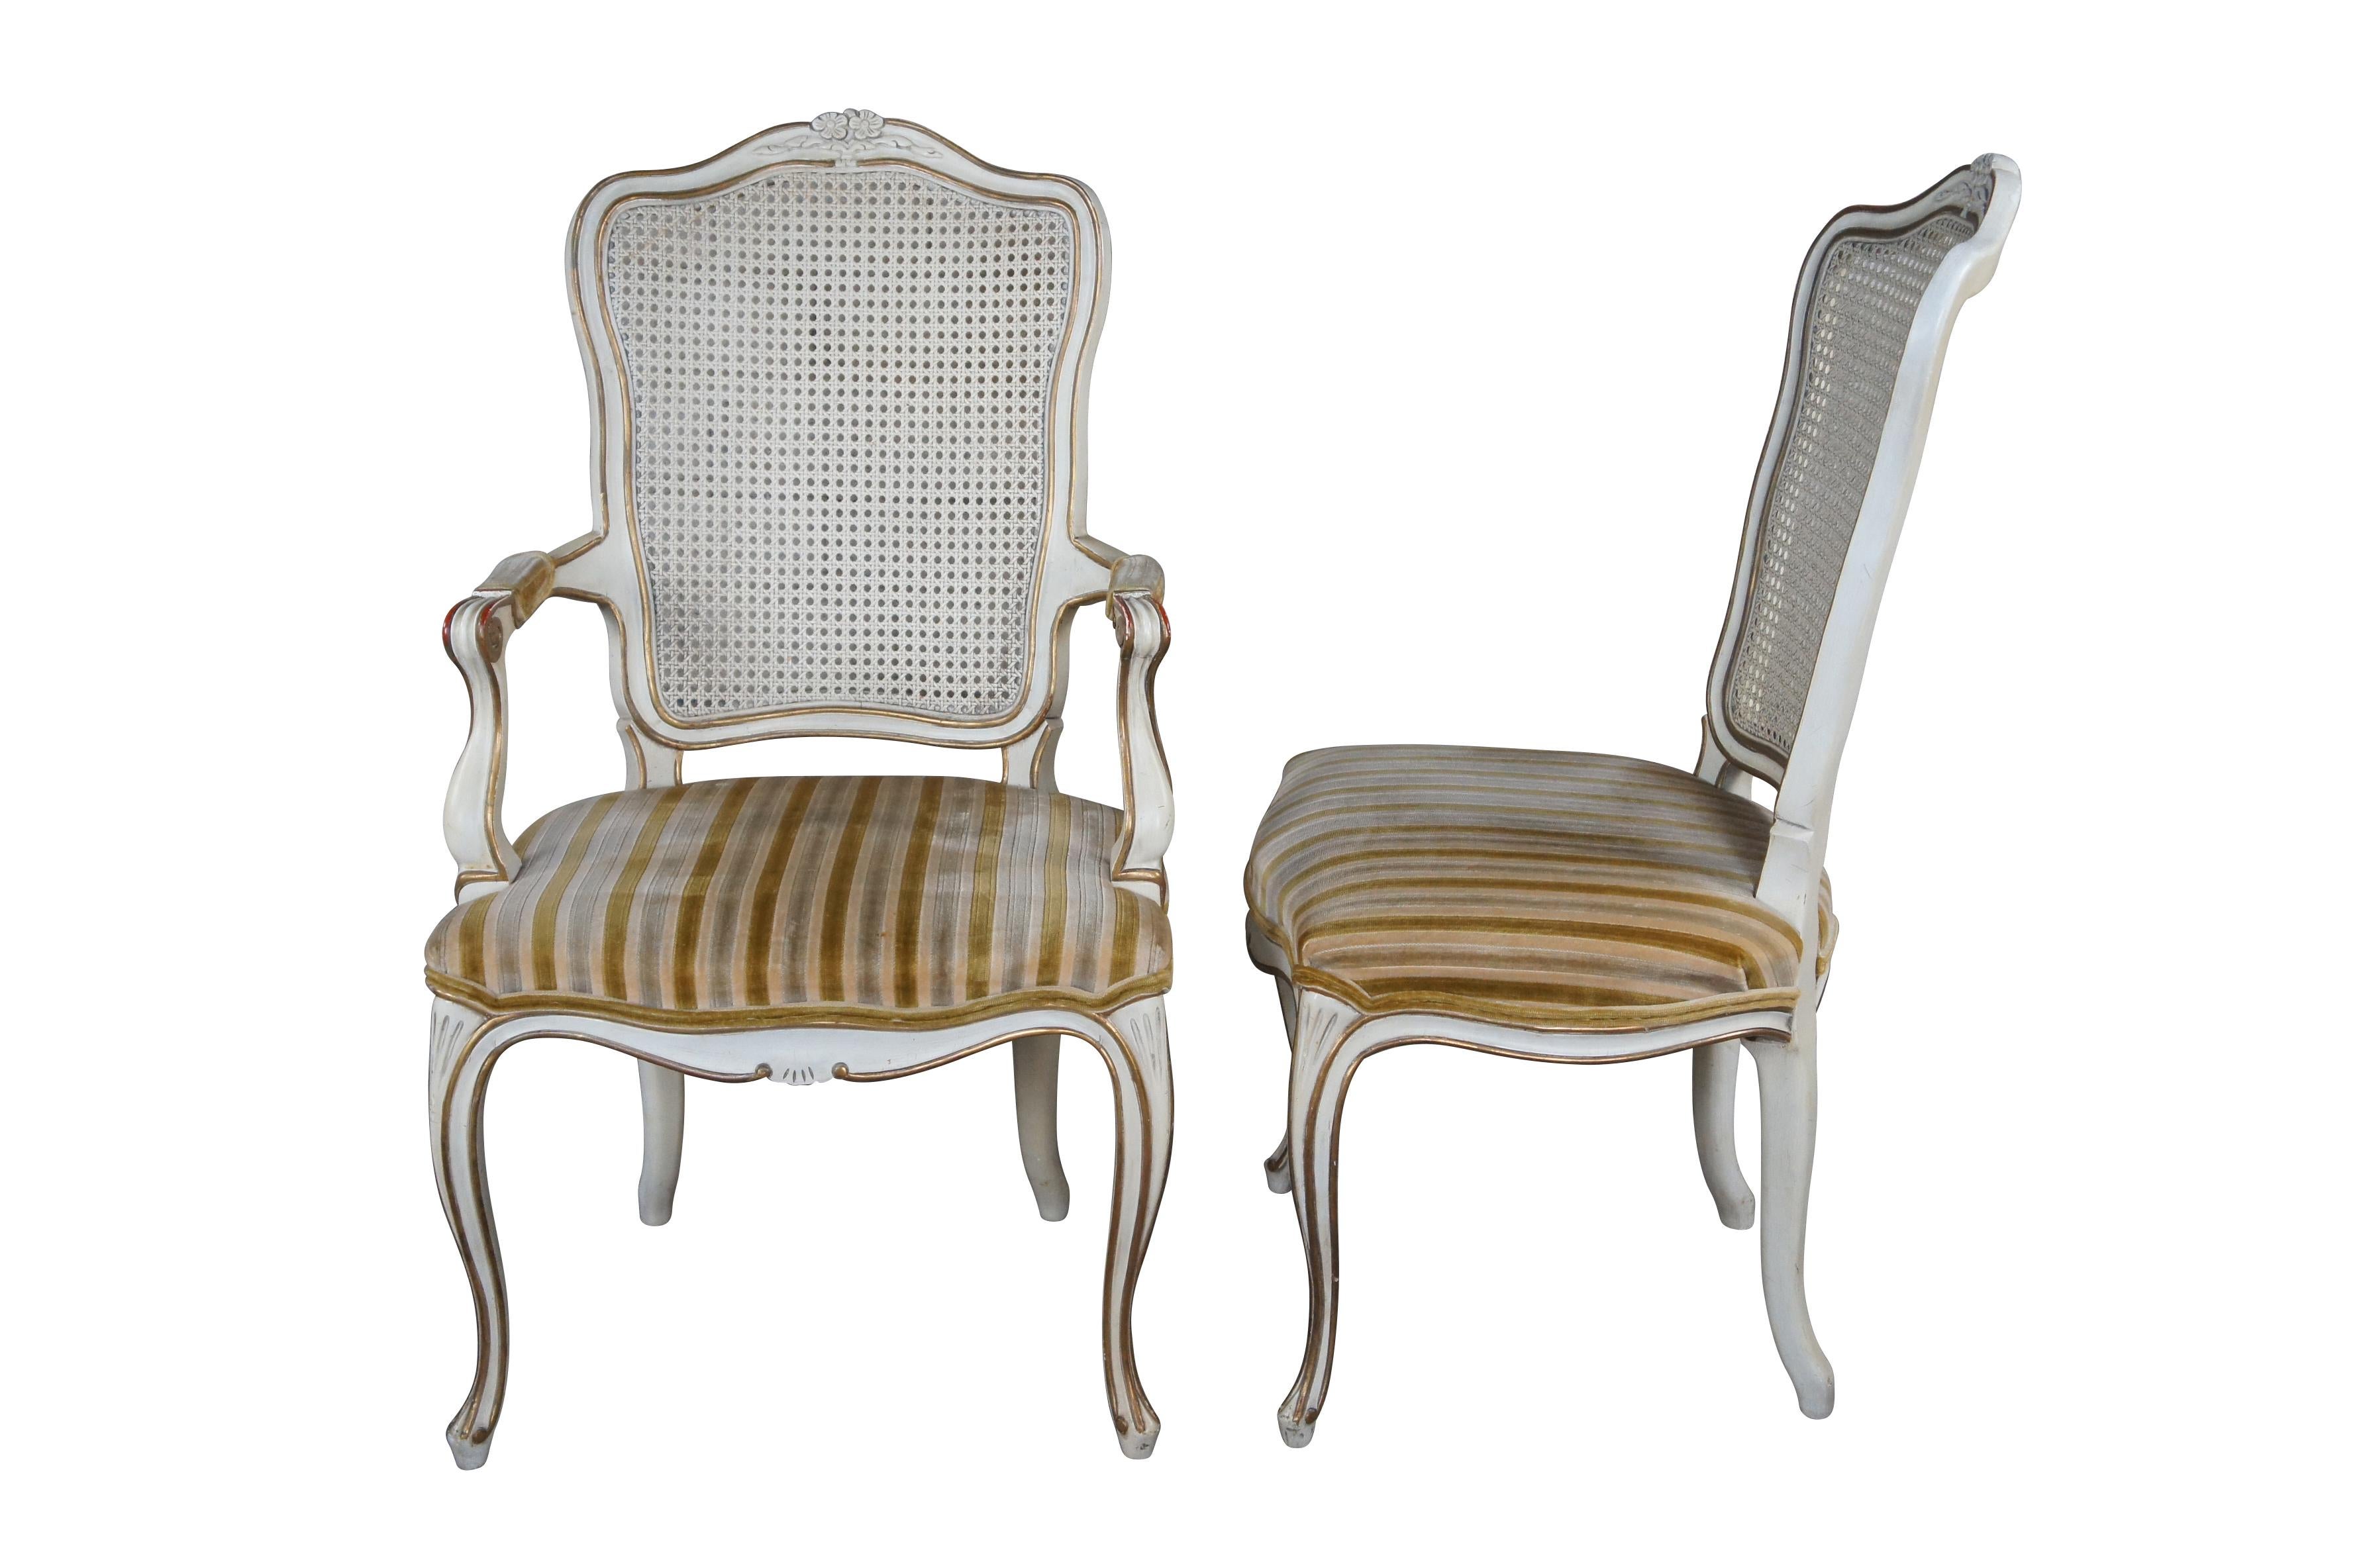 Vintage set of six Kindel Furniture Co. french provincial dining chairs featuring serpentine form with caned back, fauteuil arms, white and gold painted accents and striped velvet fabric.  Made by Michigan Chair Co of Grand Rapids, circa